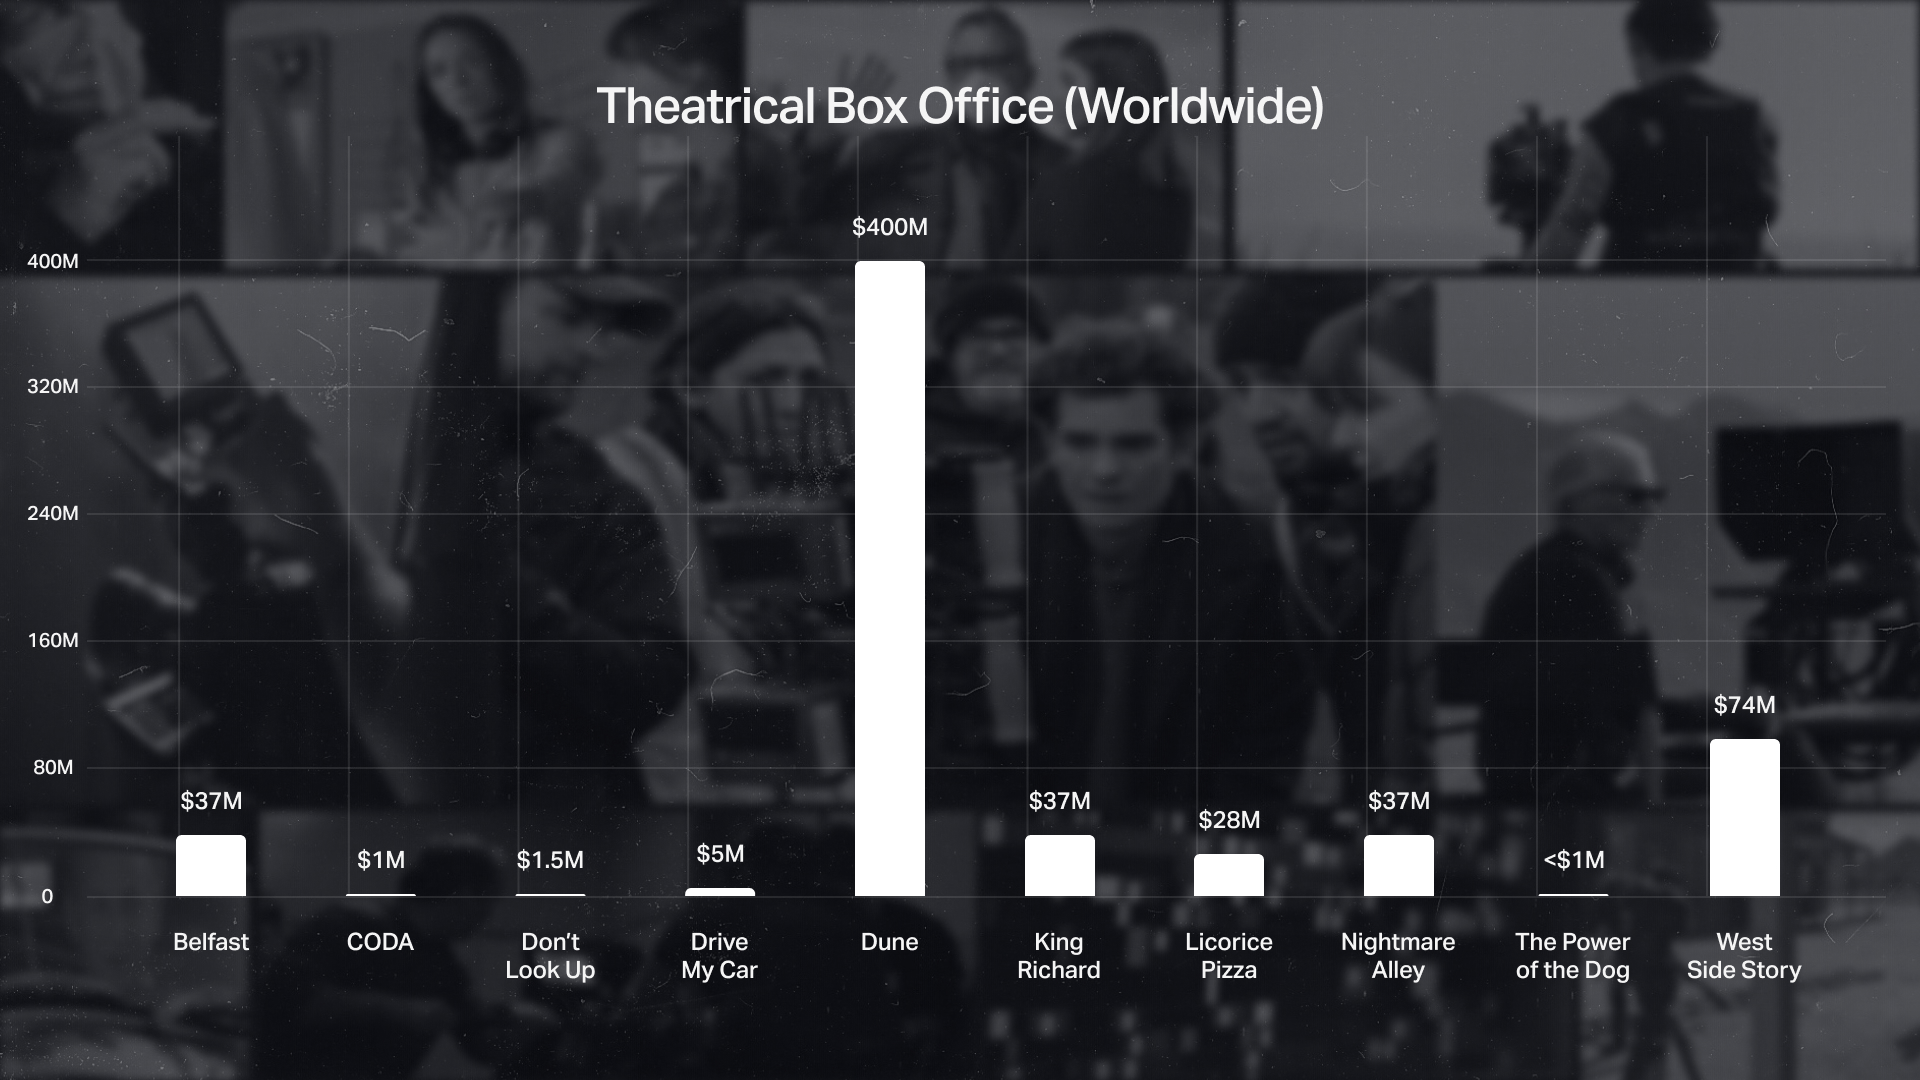 If box office takings were the only metric, Dune is the clear winner.